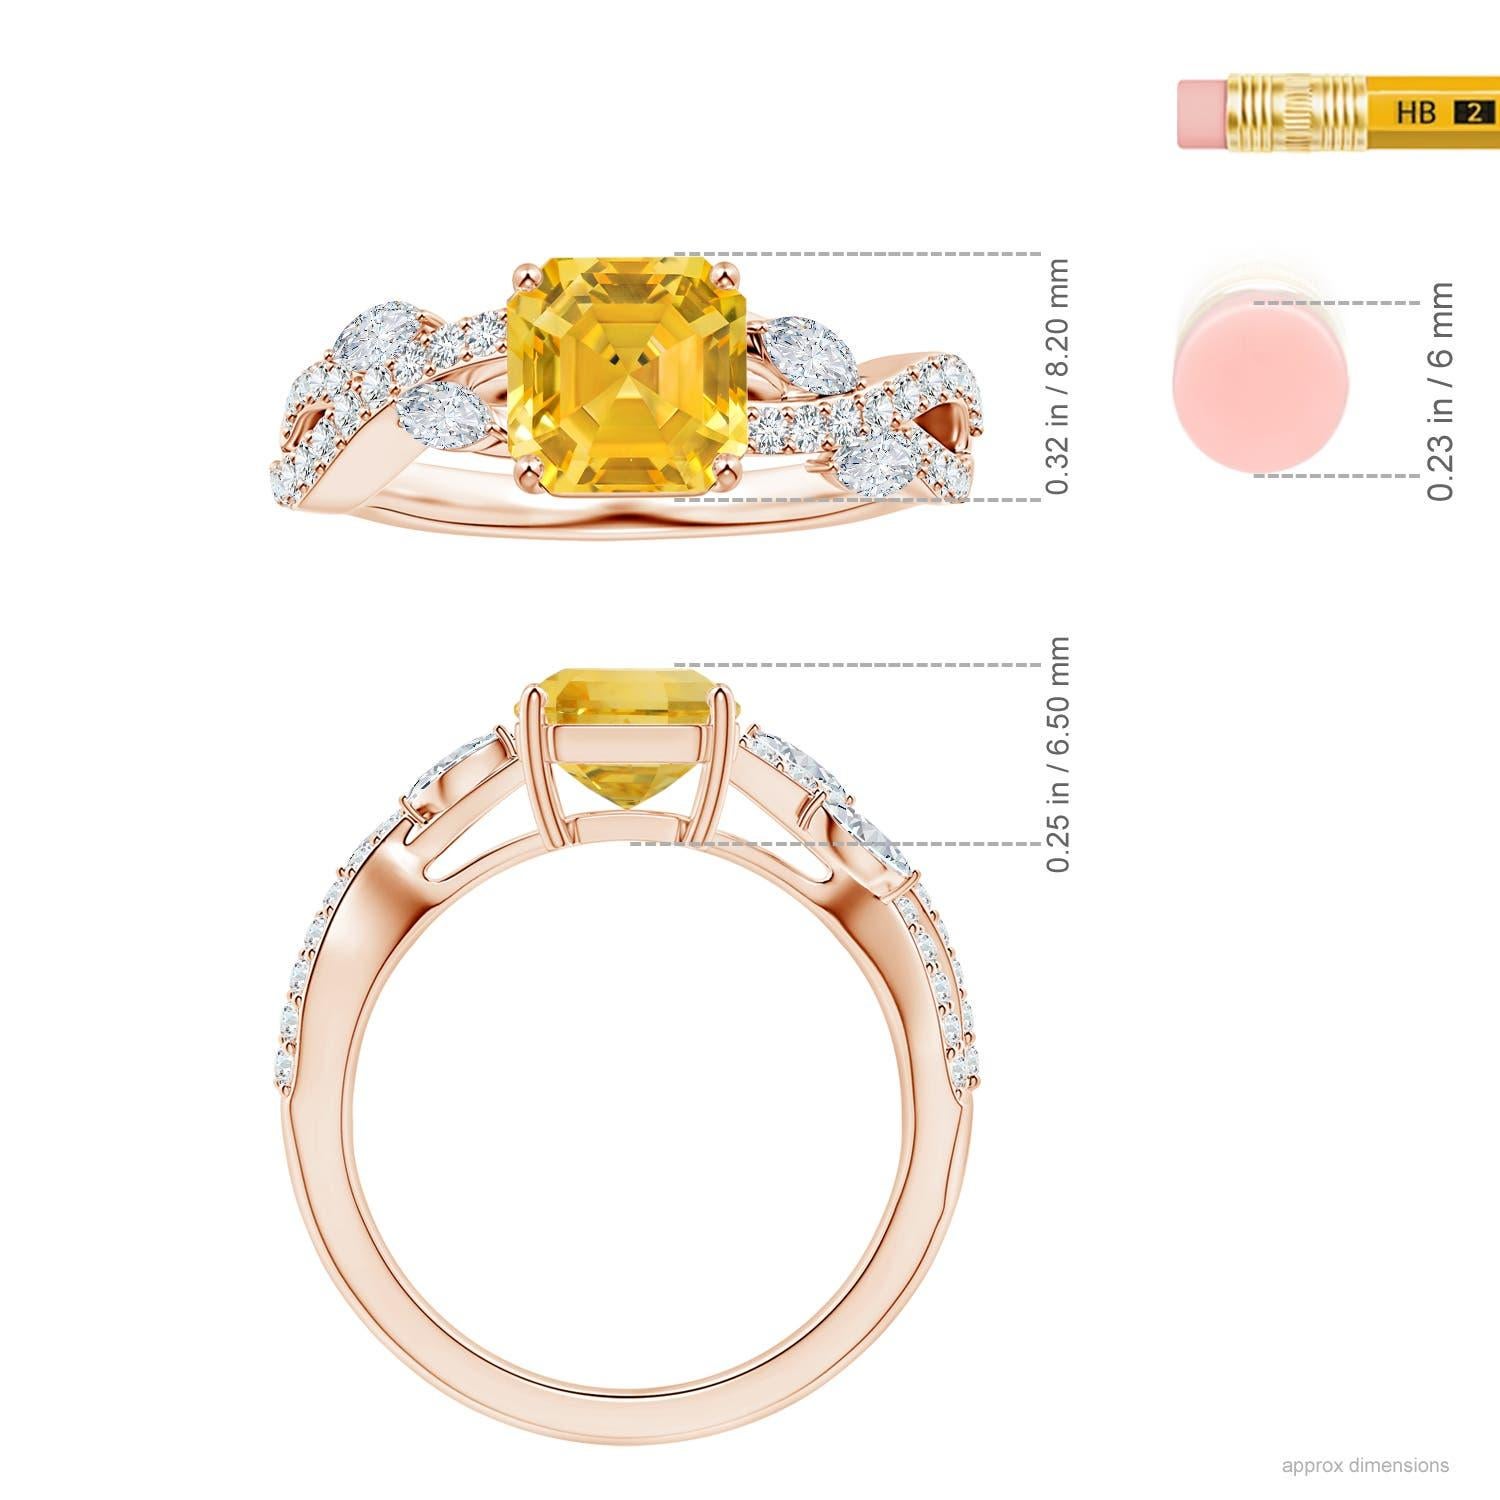 For Sale:  Angara GIA Certified Emerald-Cut Yellow Sapphire Ring in Rose Gold with Diamonds 5